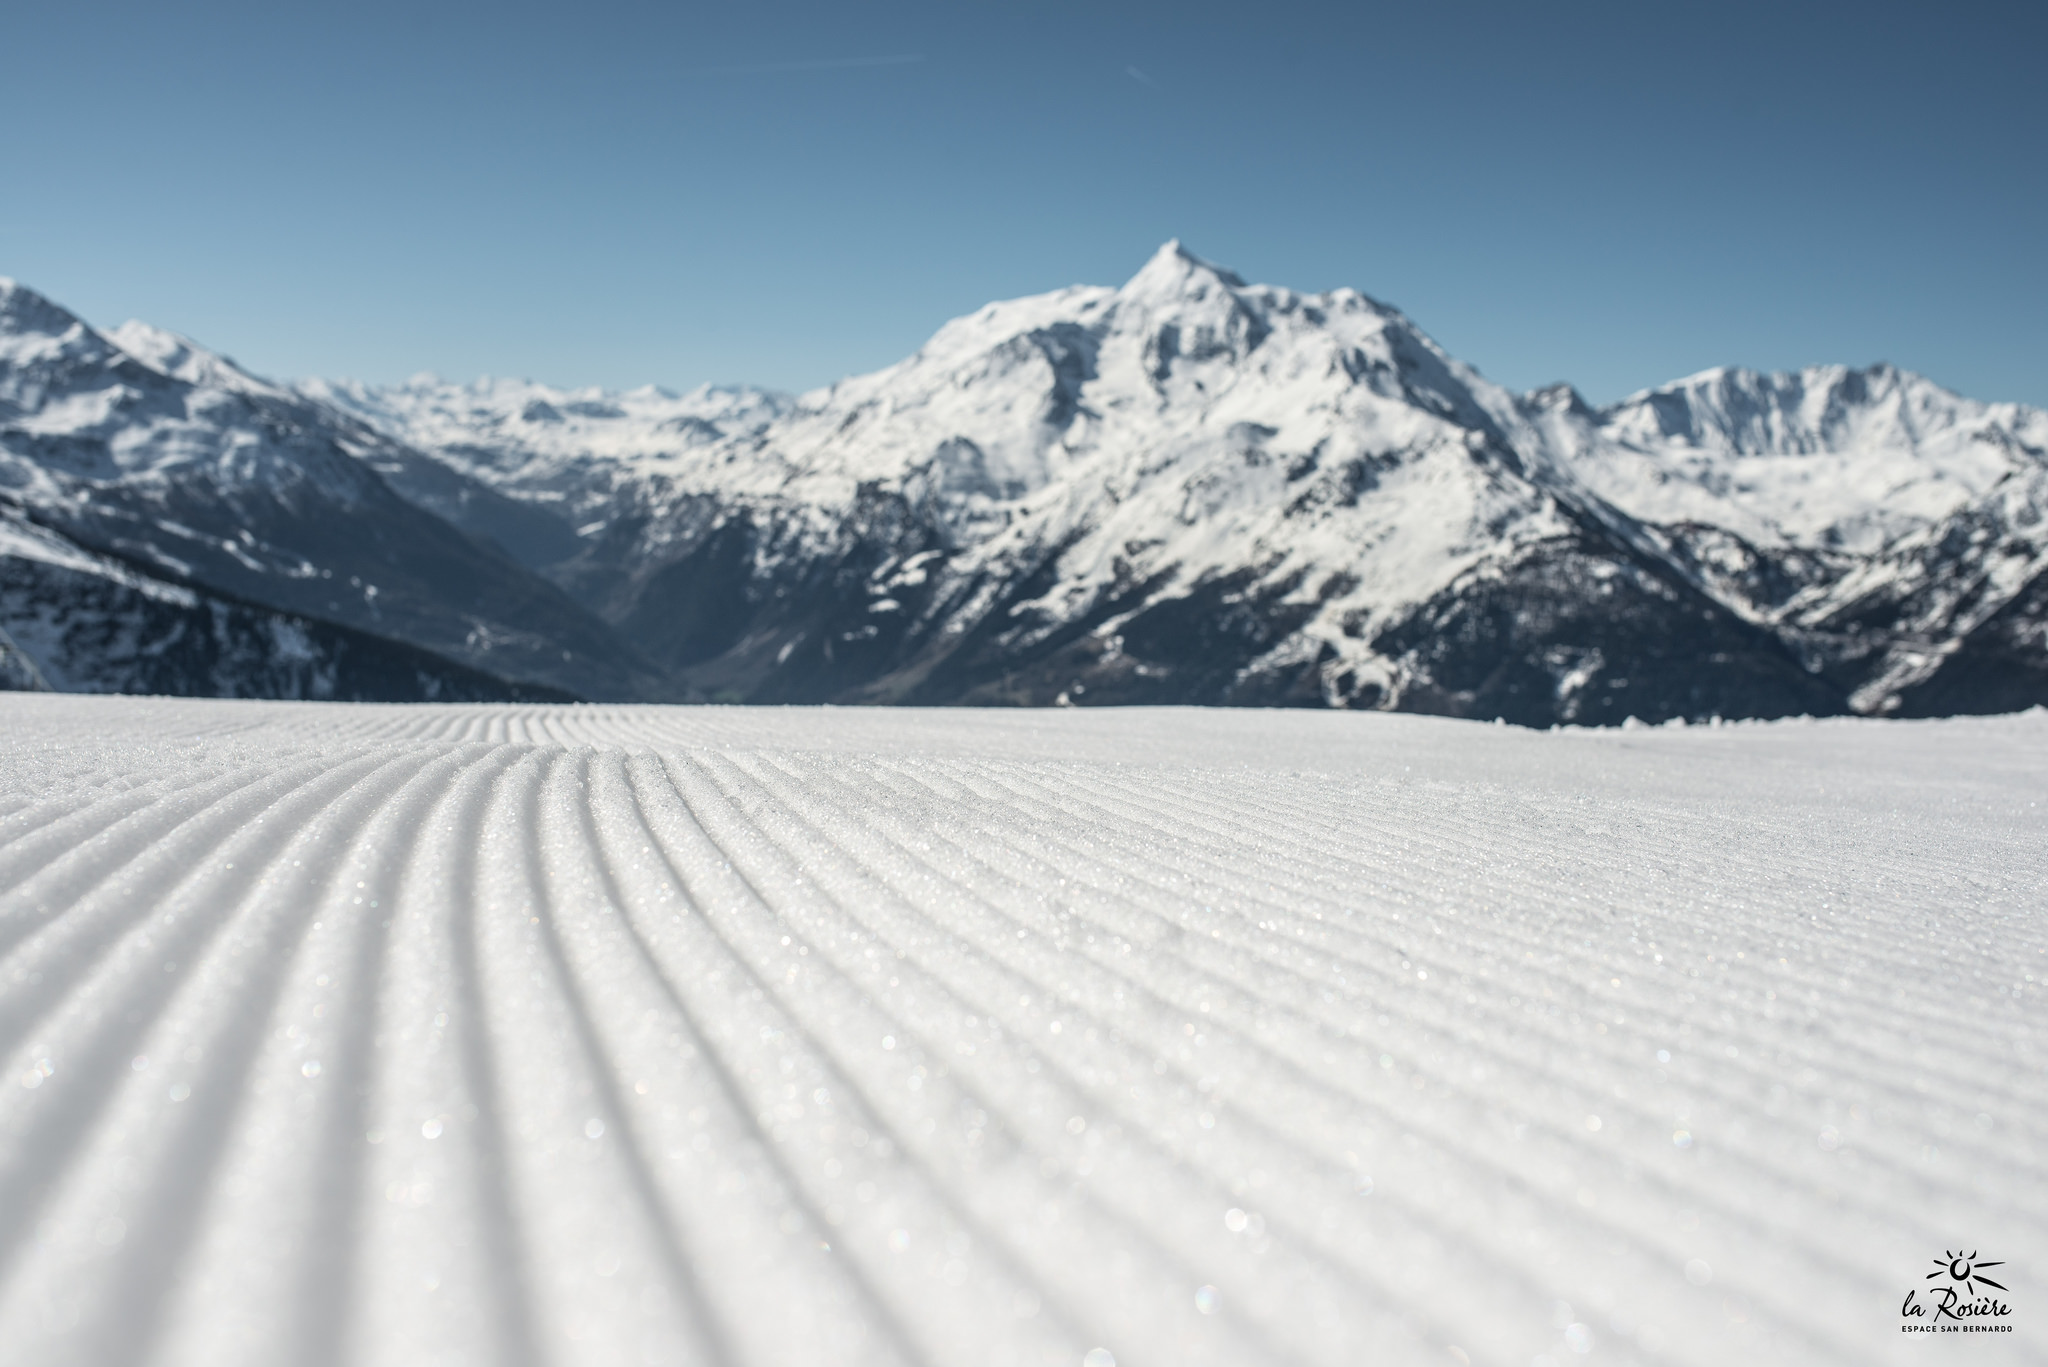 Early risers can have the mountains for themselves at La Rosière!